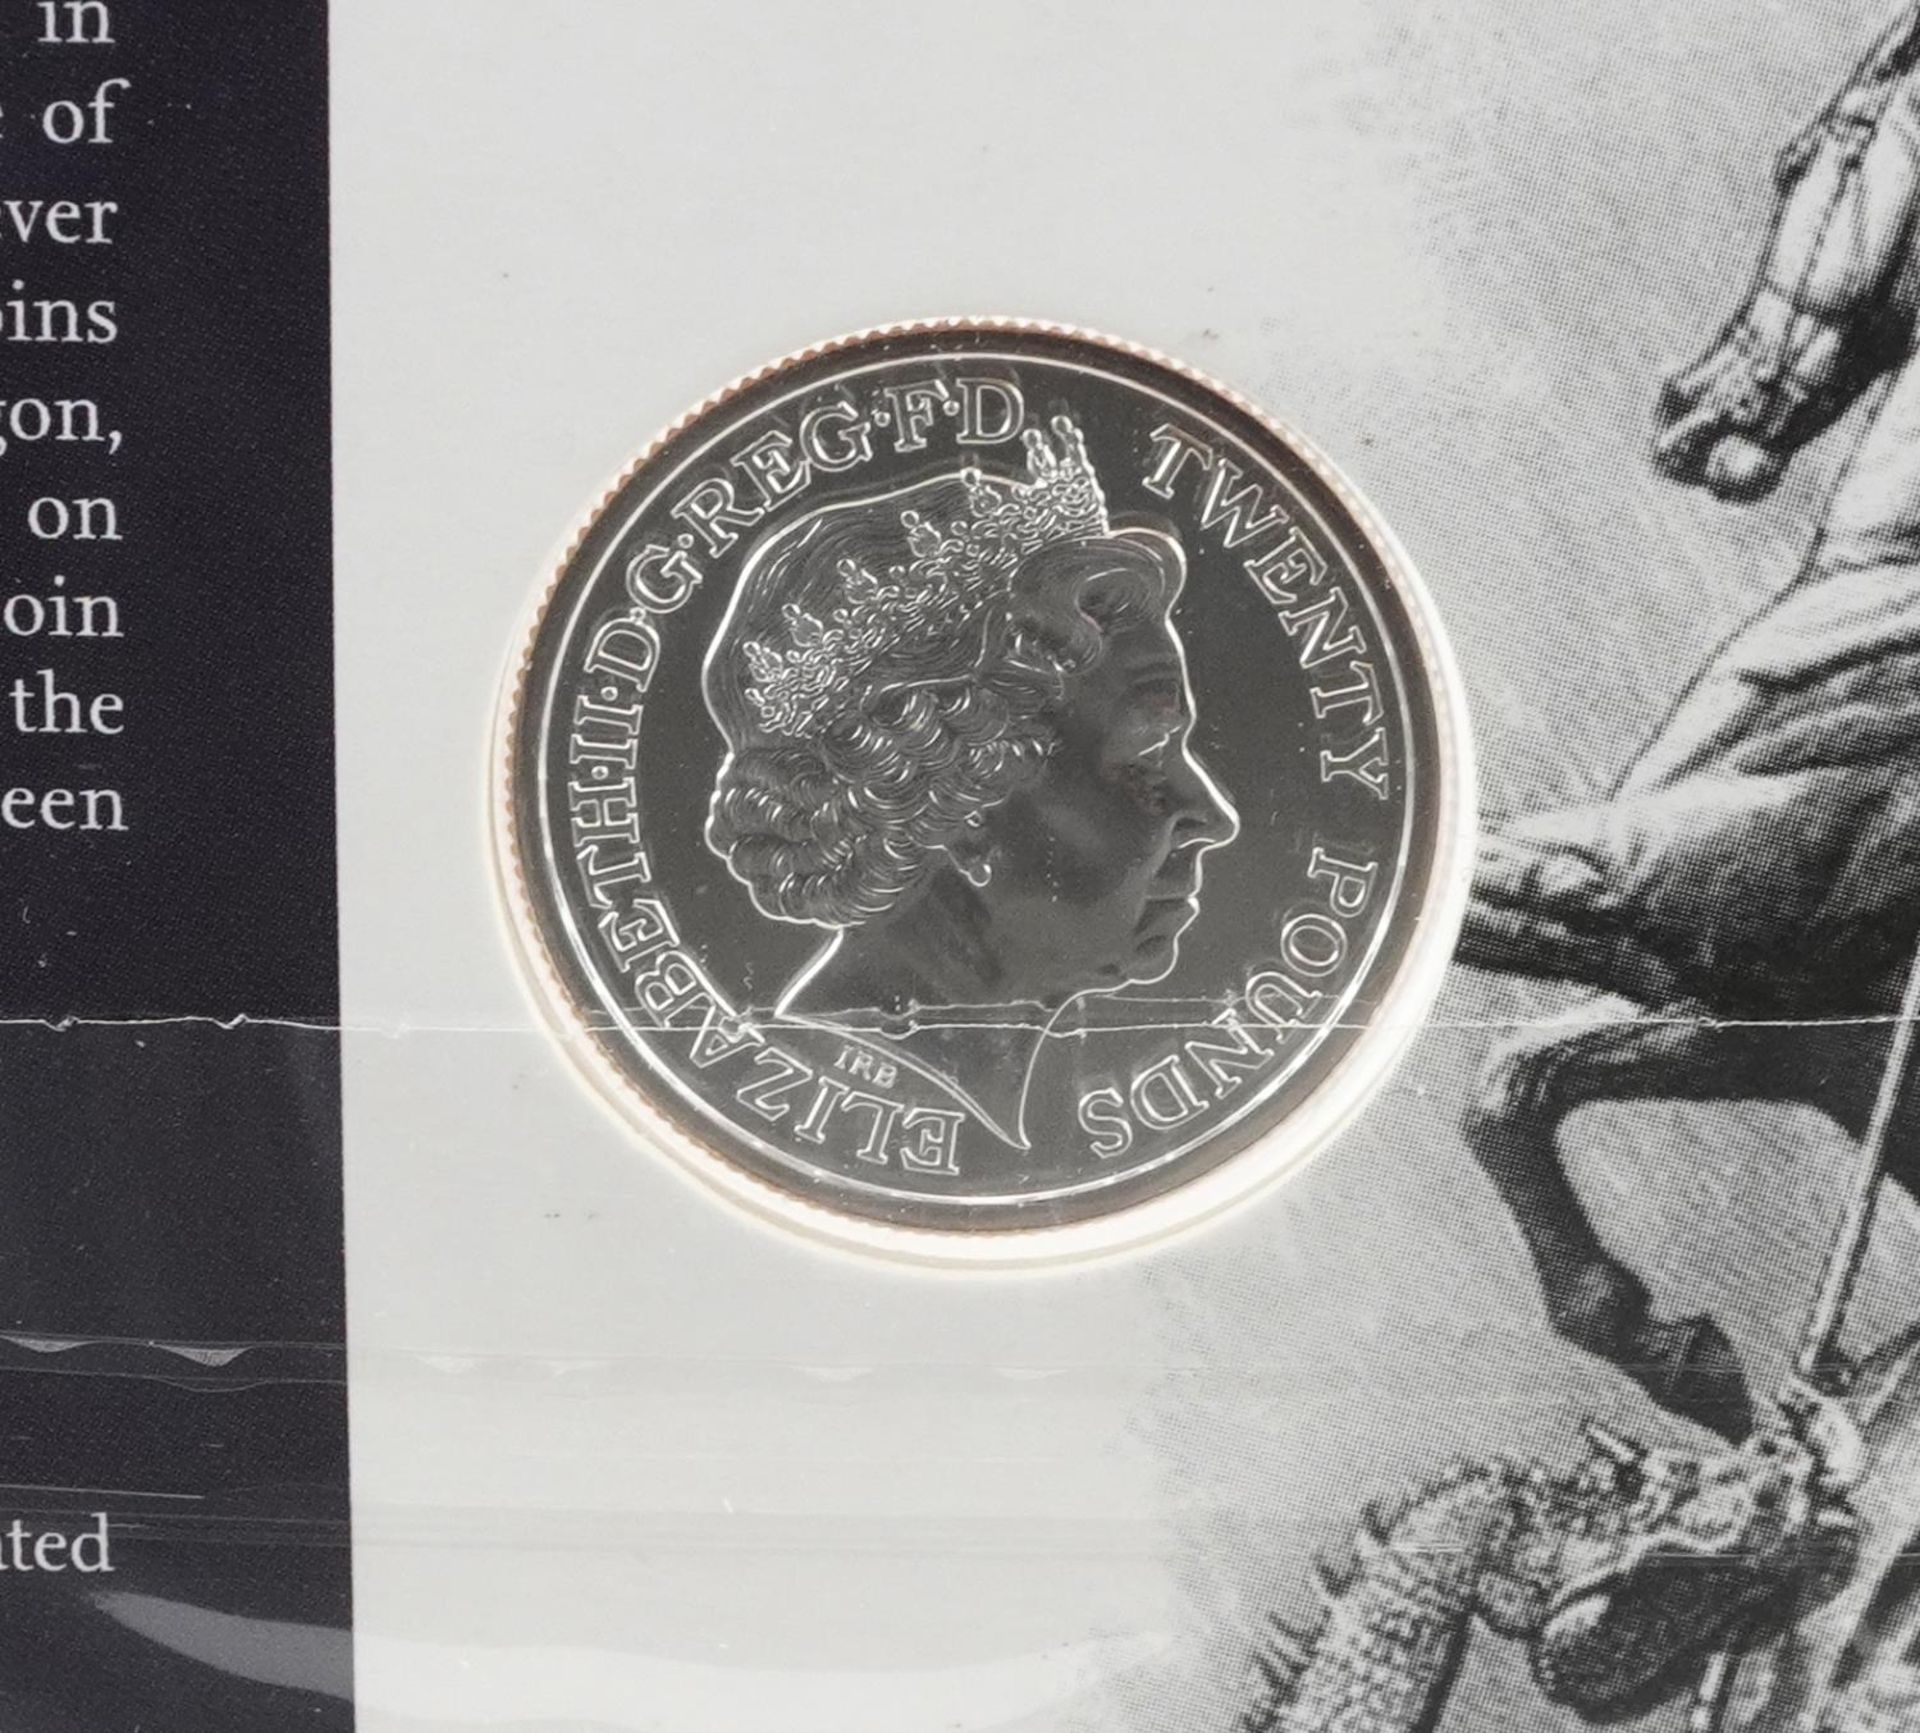 Three Elizabeth II 2013 George and the Dragon twenty pound fine silver coins by The Royal Mint - Image 4 of 4